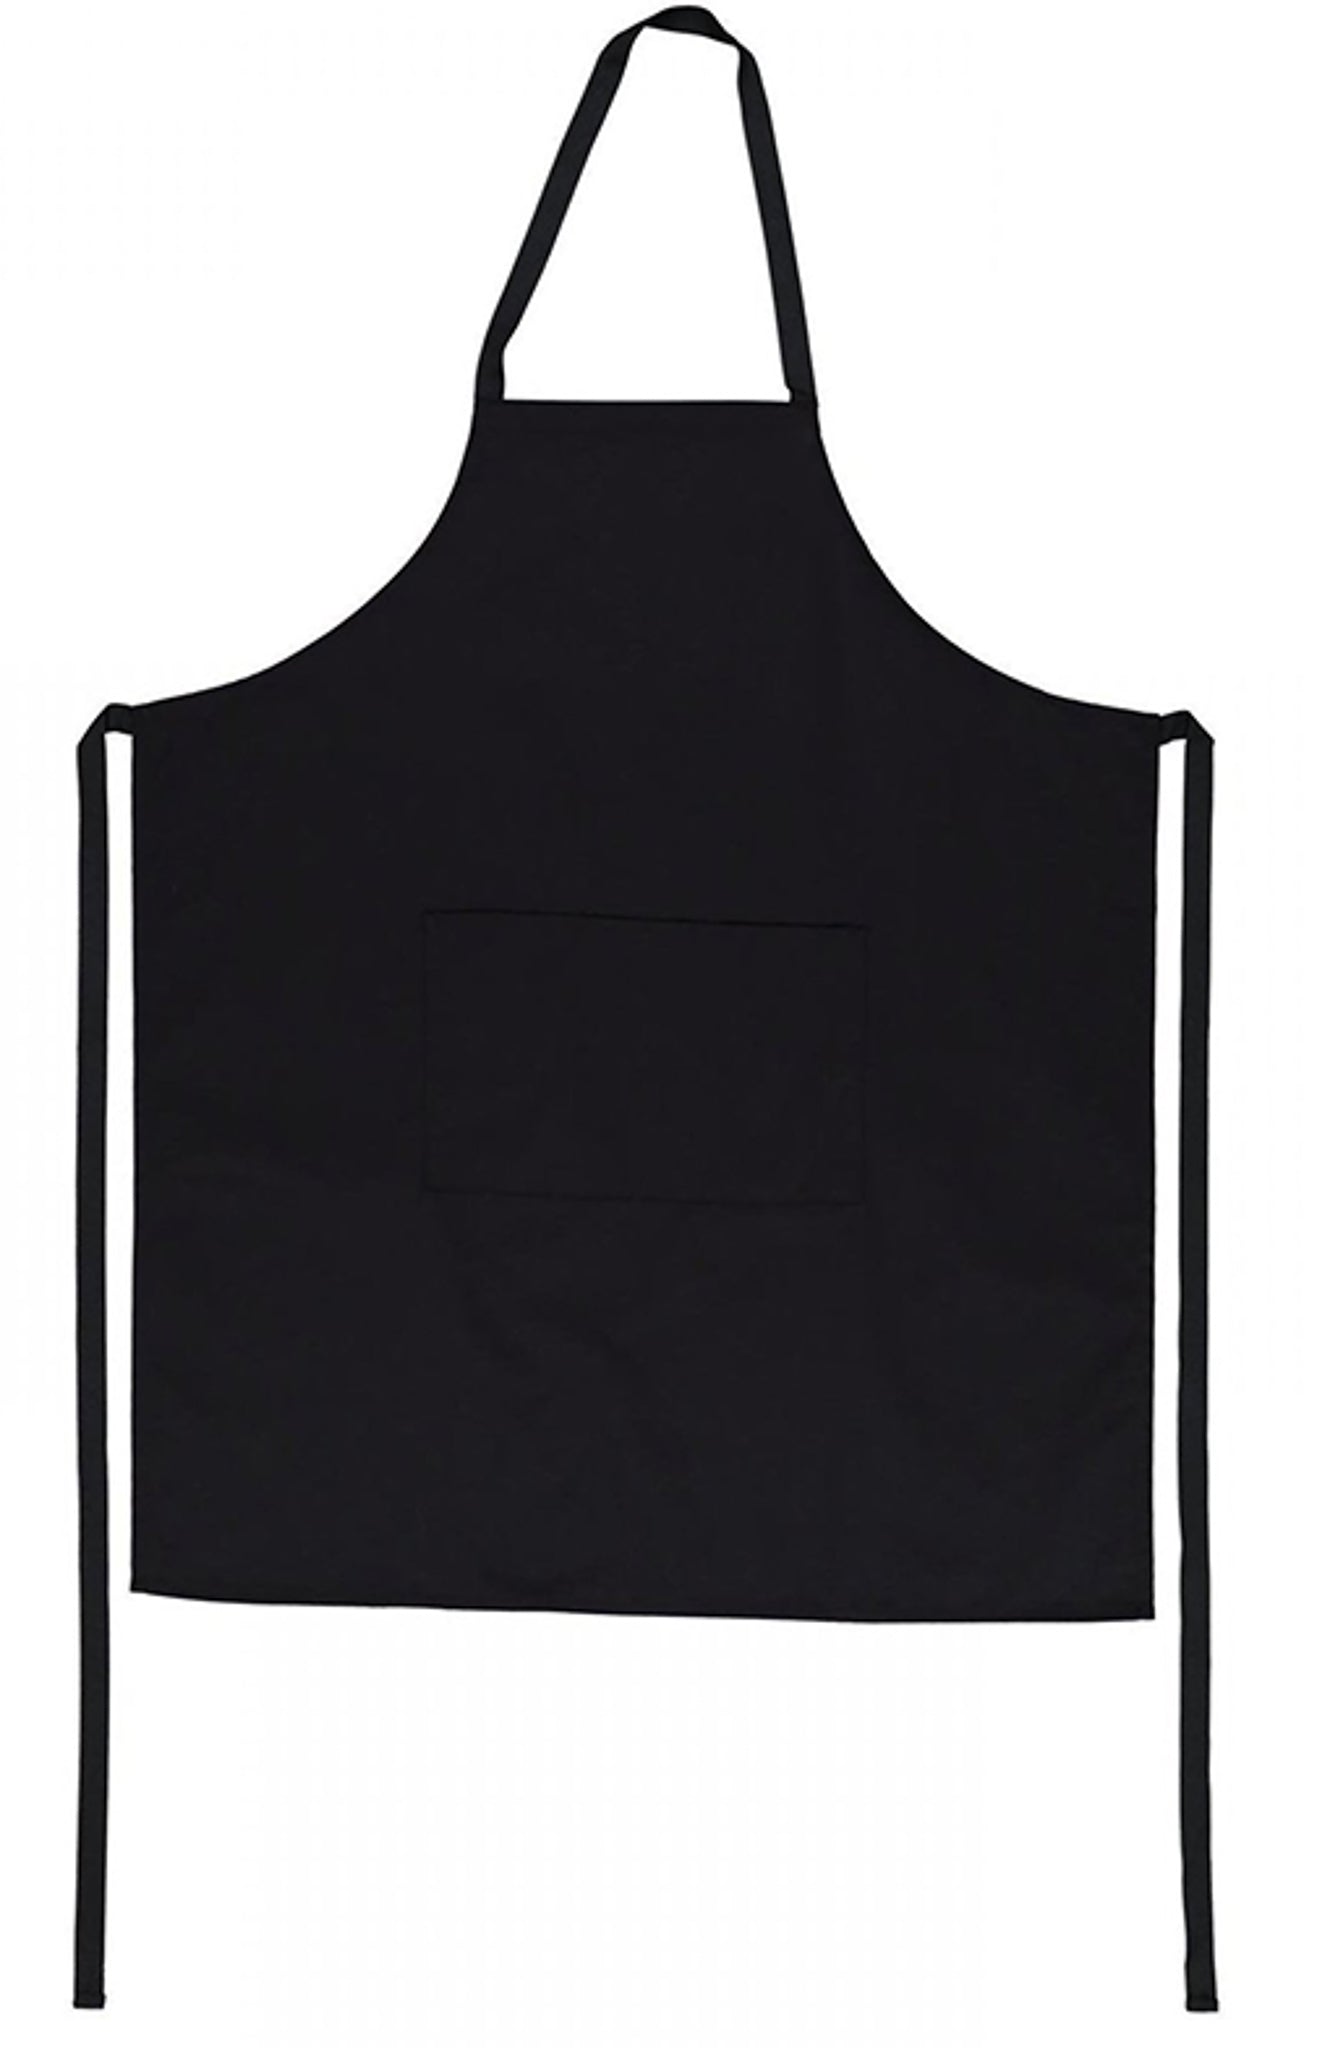 Barbecue Apron With Pocket